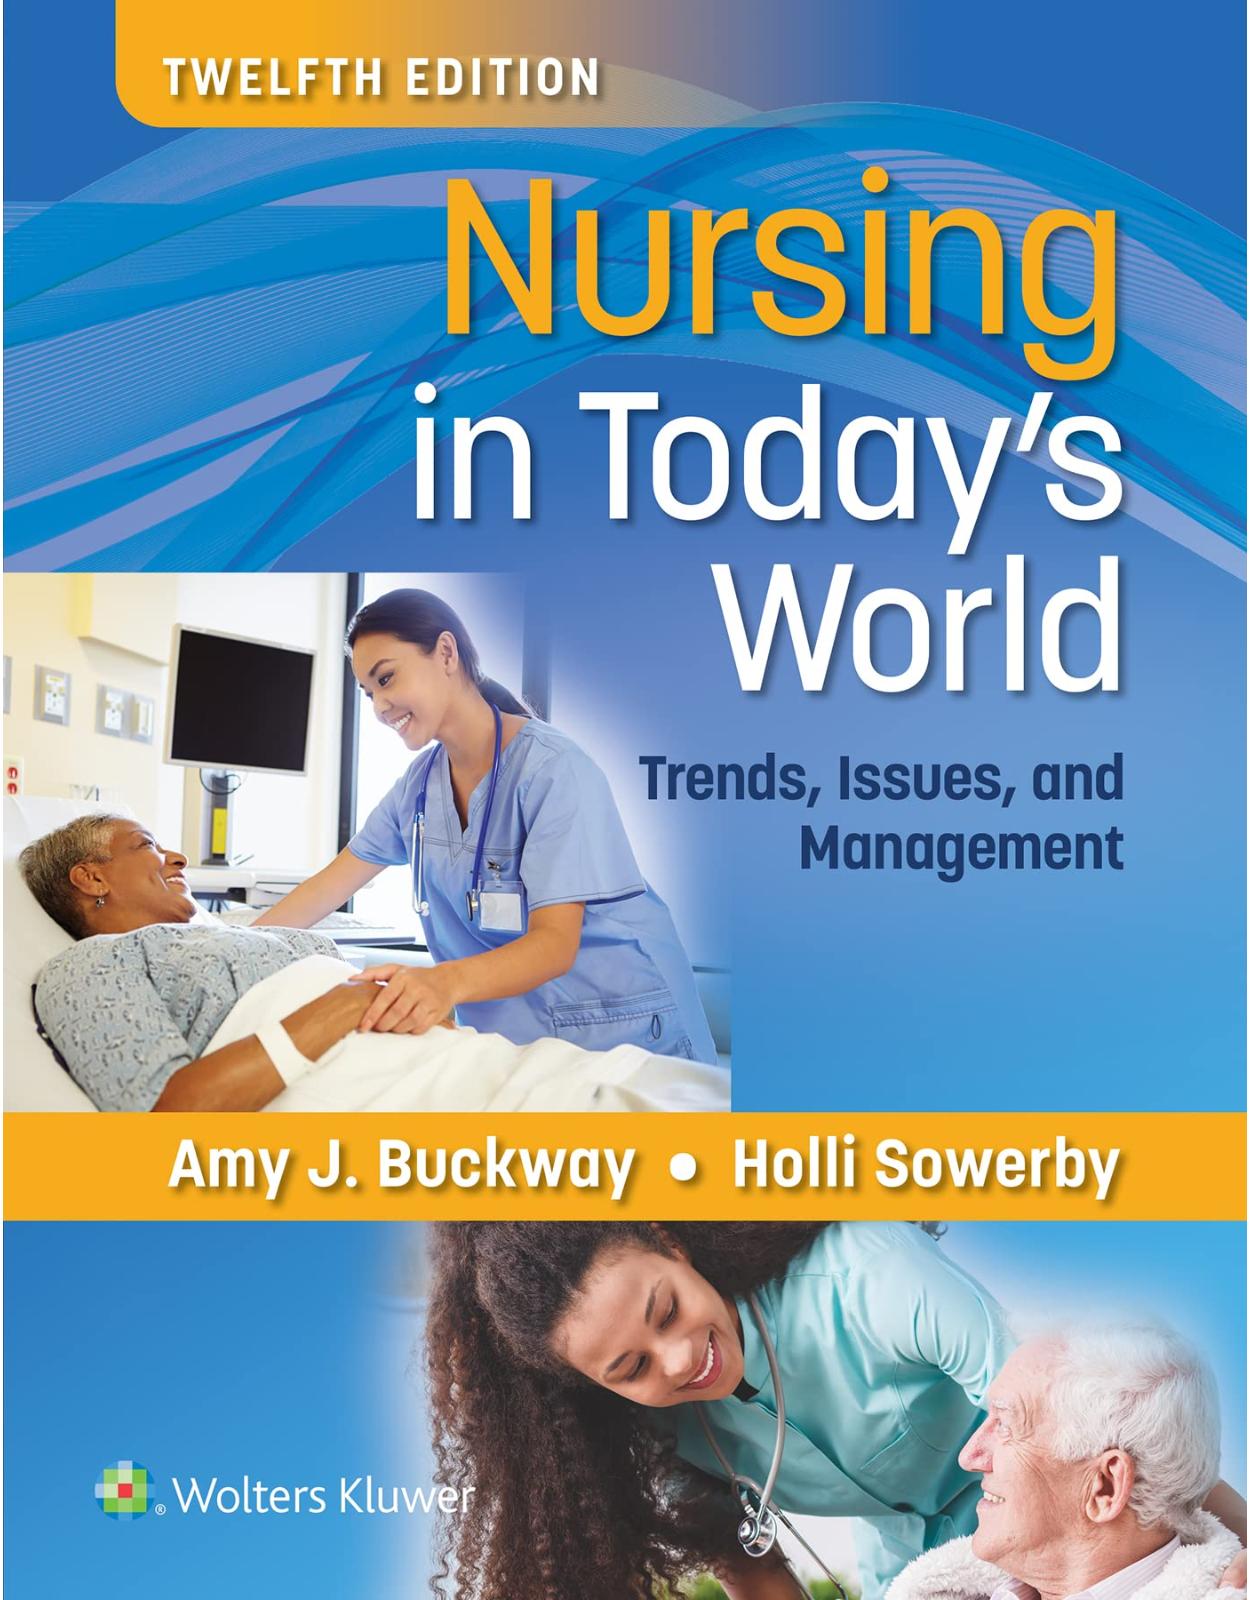 Nursing in Today’s World: Trends, Issues, and Management